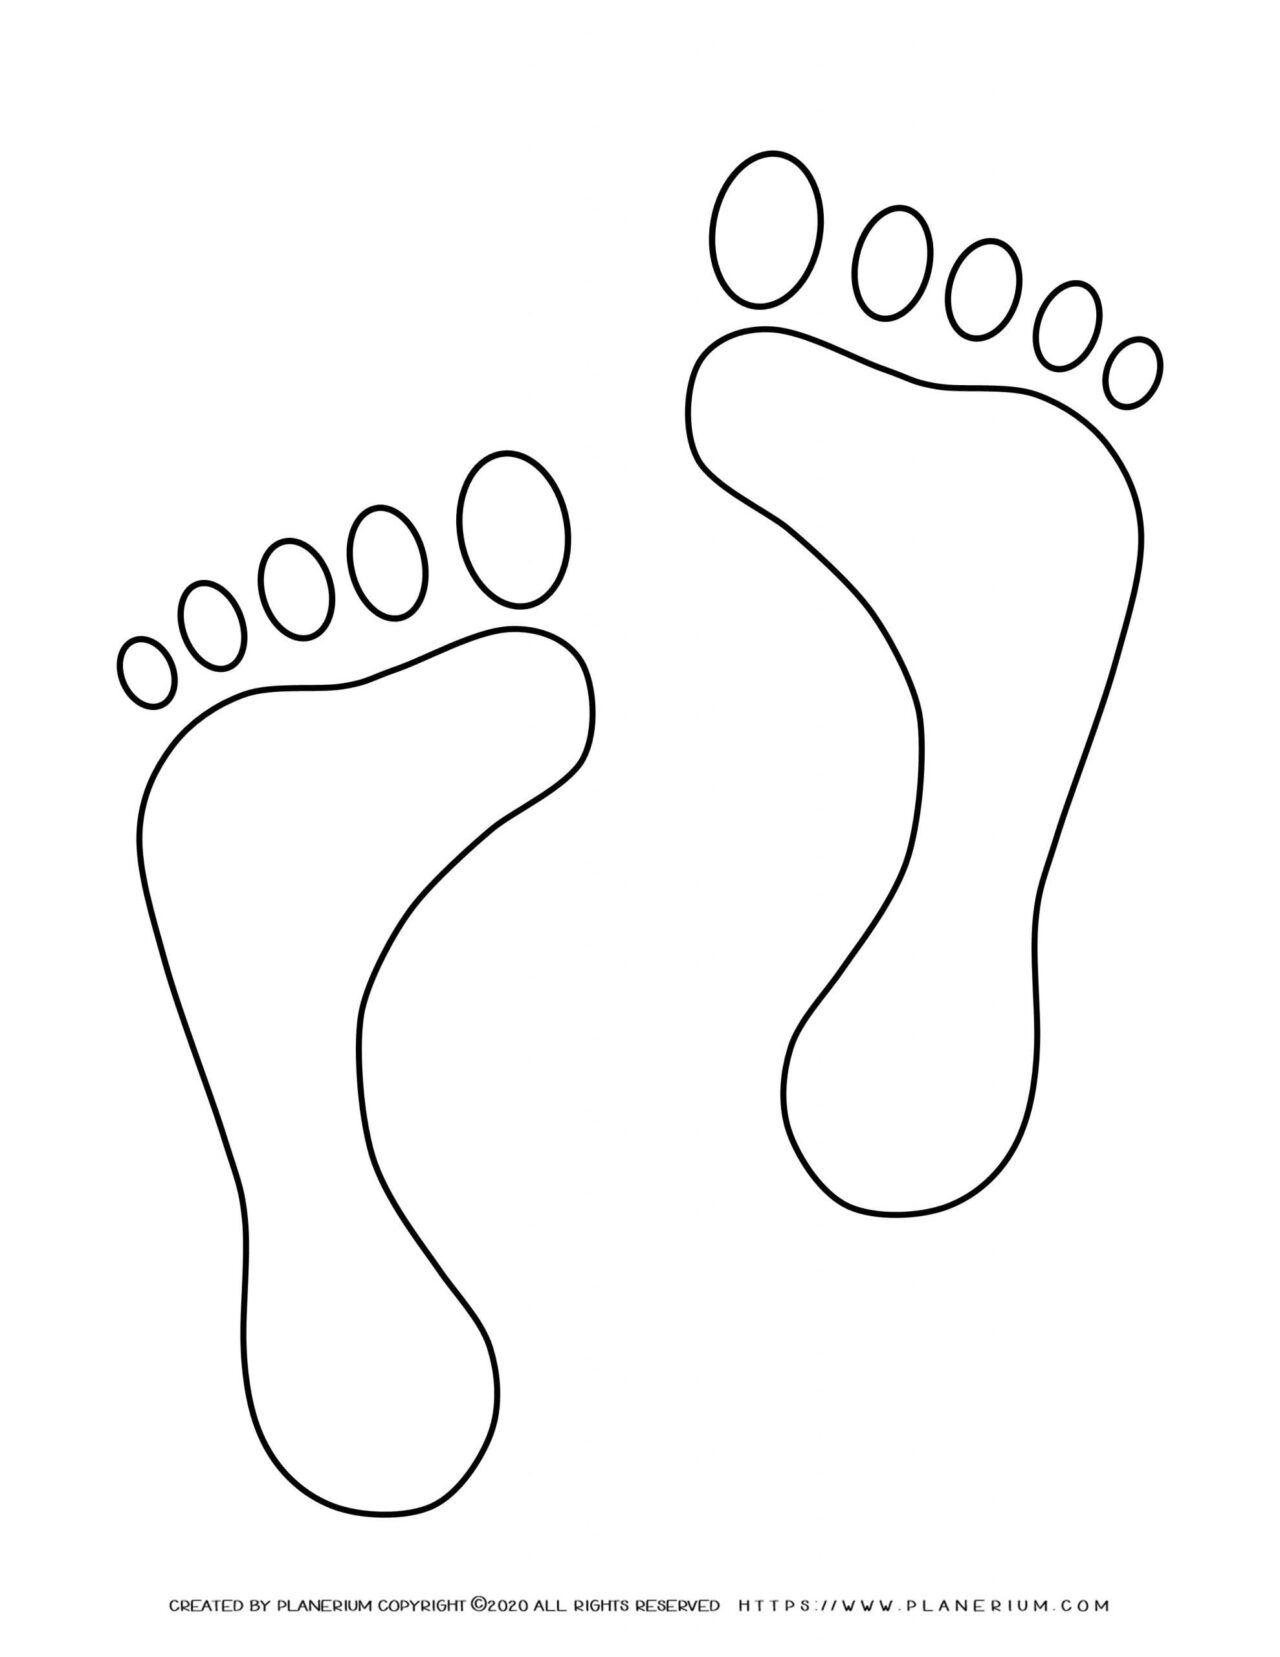 Summer - Coloring Page - Bare foots